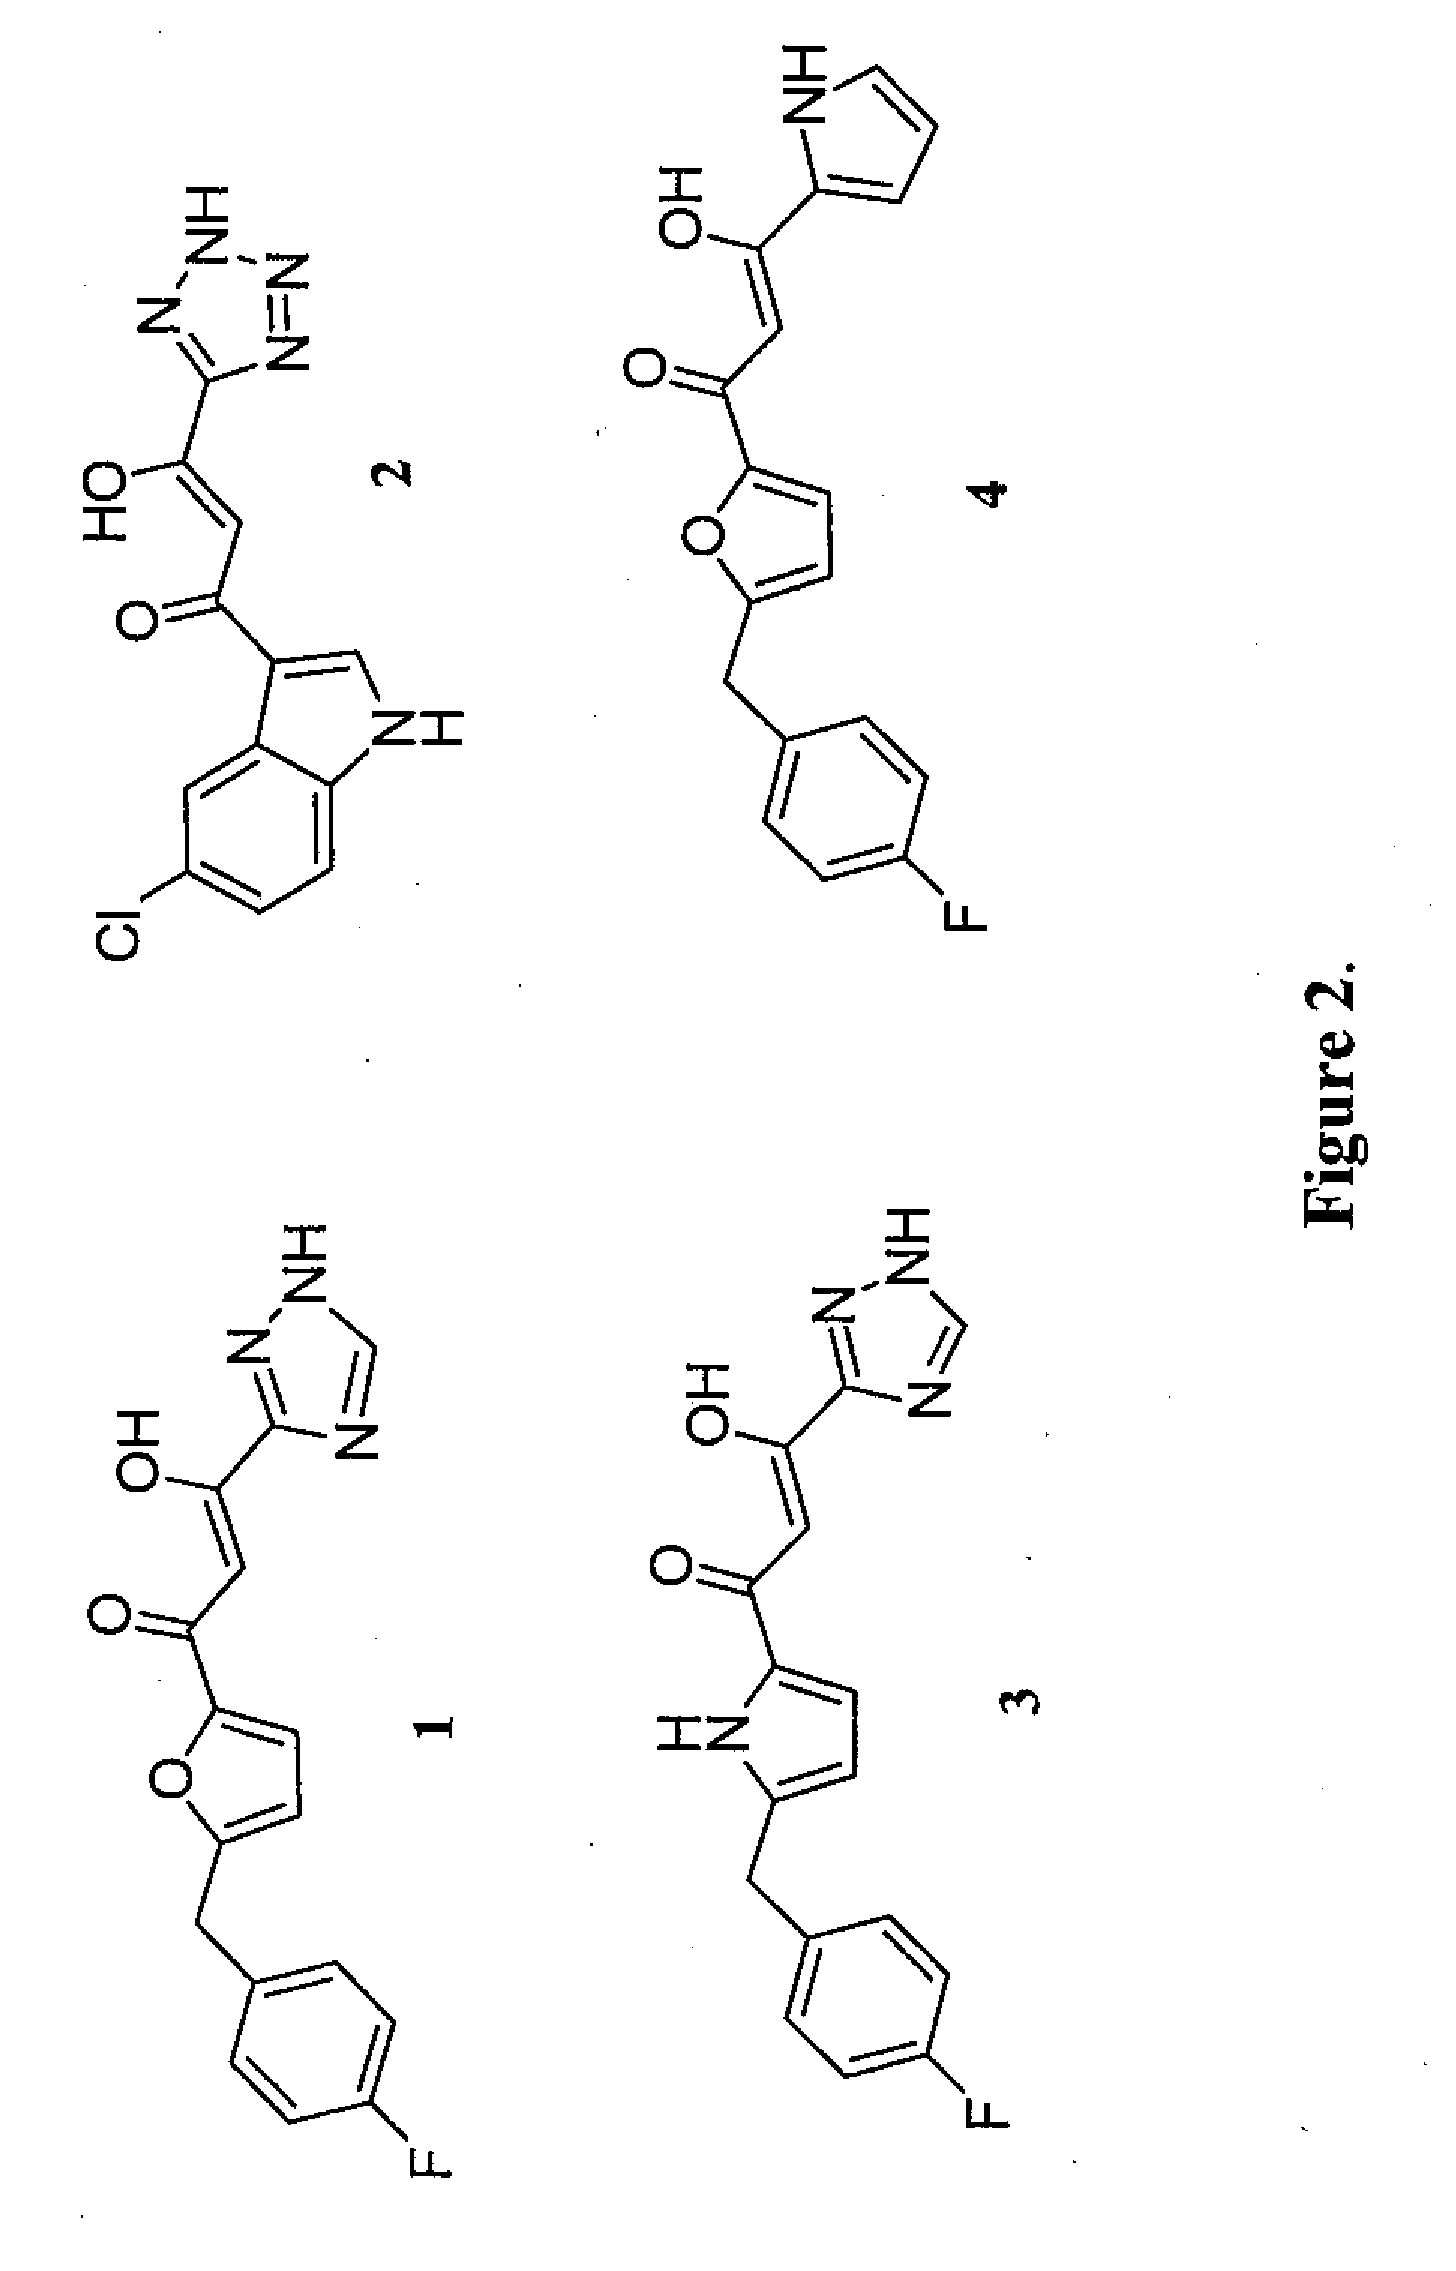 Compounds with hiv-1 integrase inhibitory activity and use thereof as Anti-hiv/aids therapeutics